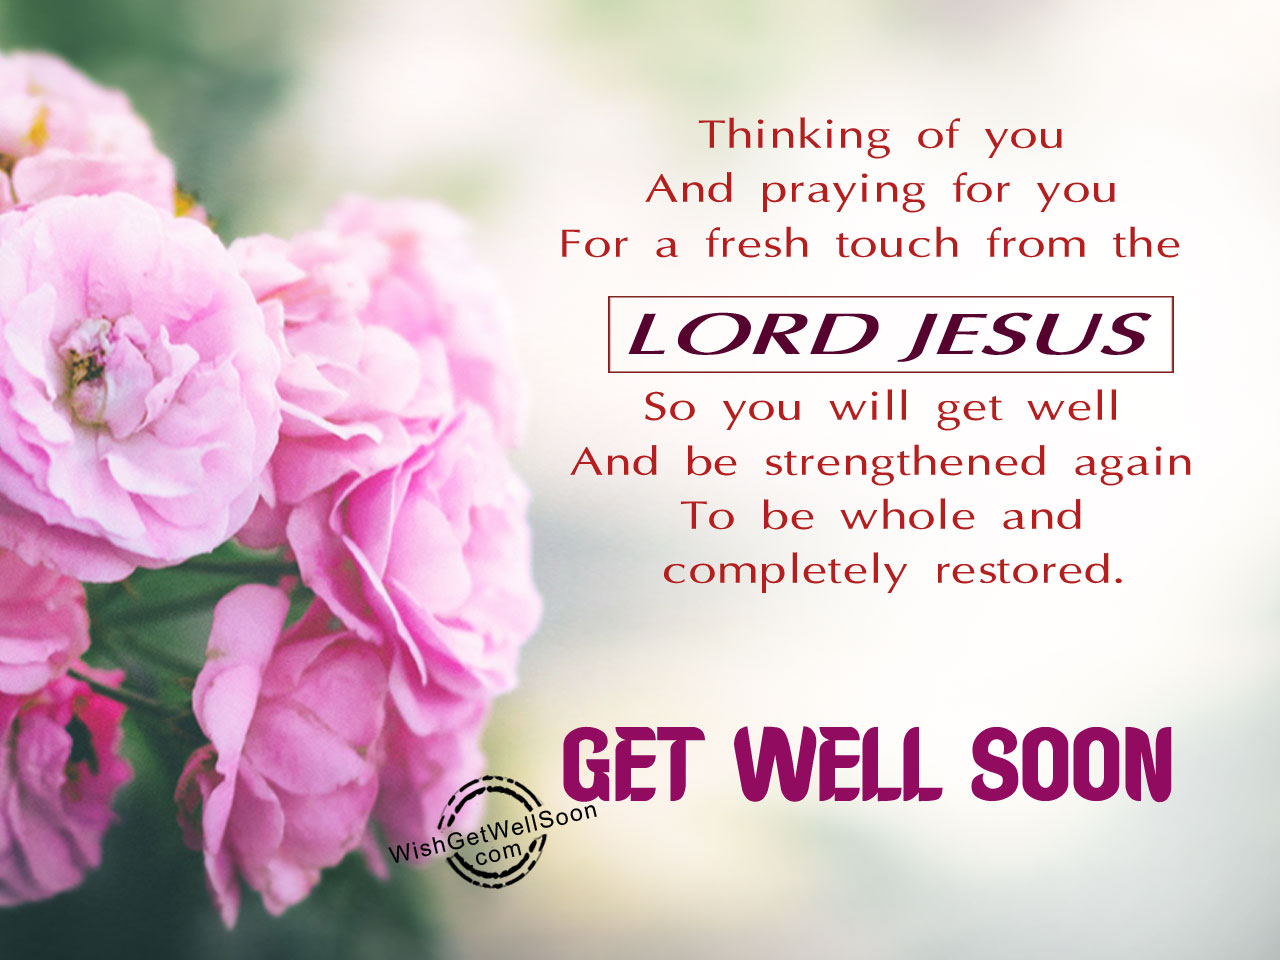 Get Well Soon Wishes For Christians Pictures, Images